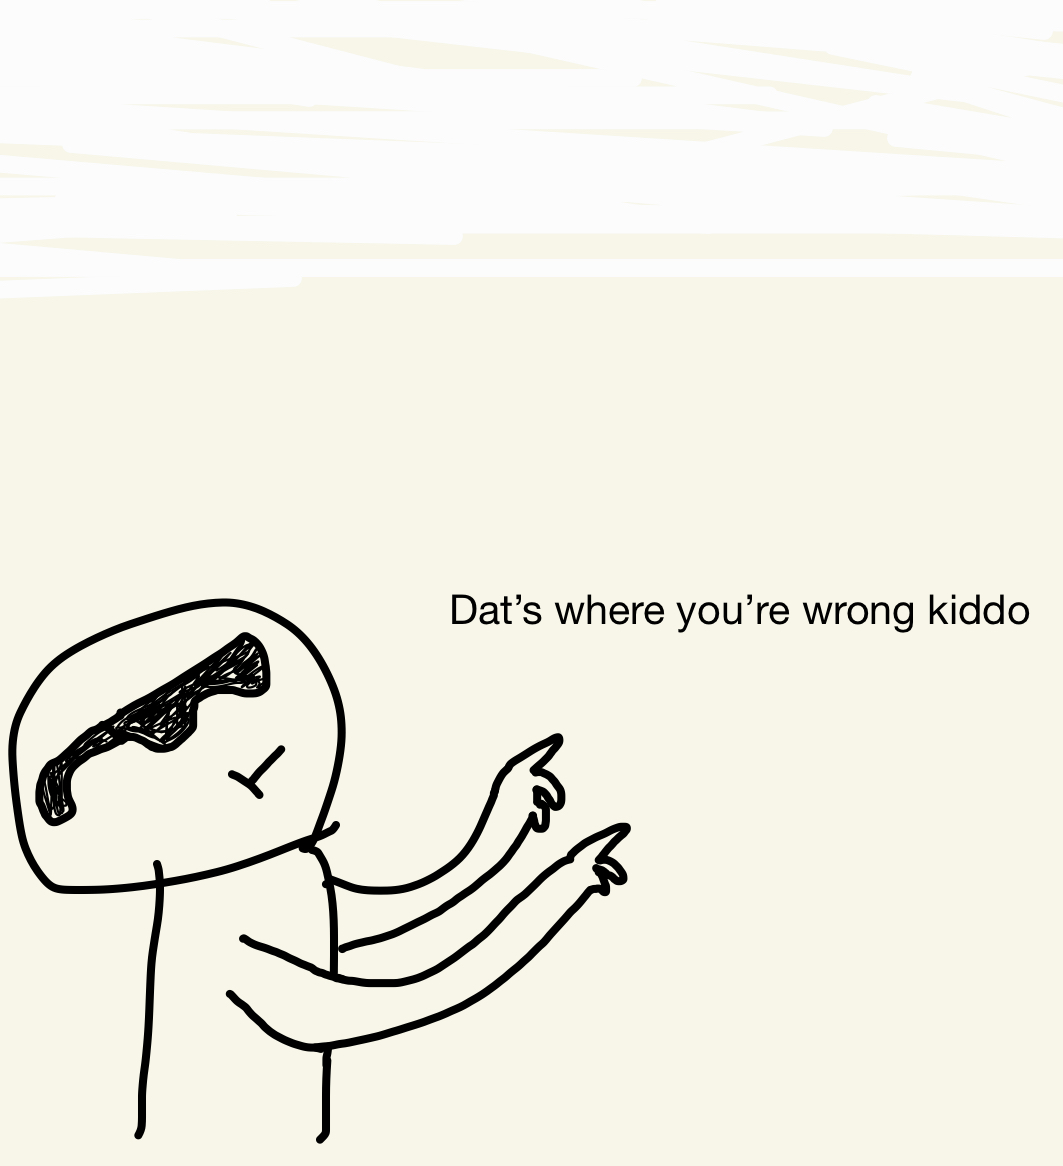 High Quality Dat where you’re wrong kiddo! (GoodNotes edition) Blank Meme Template